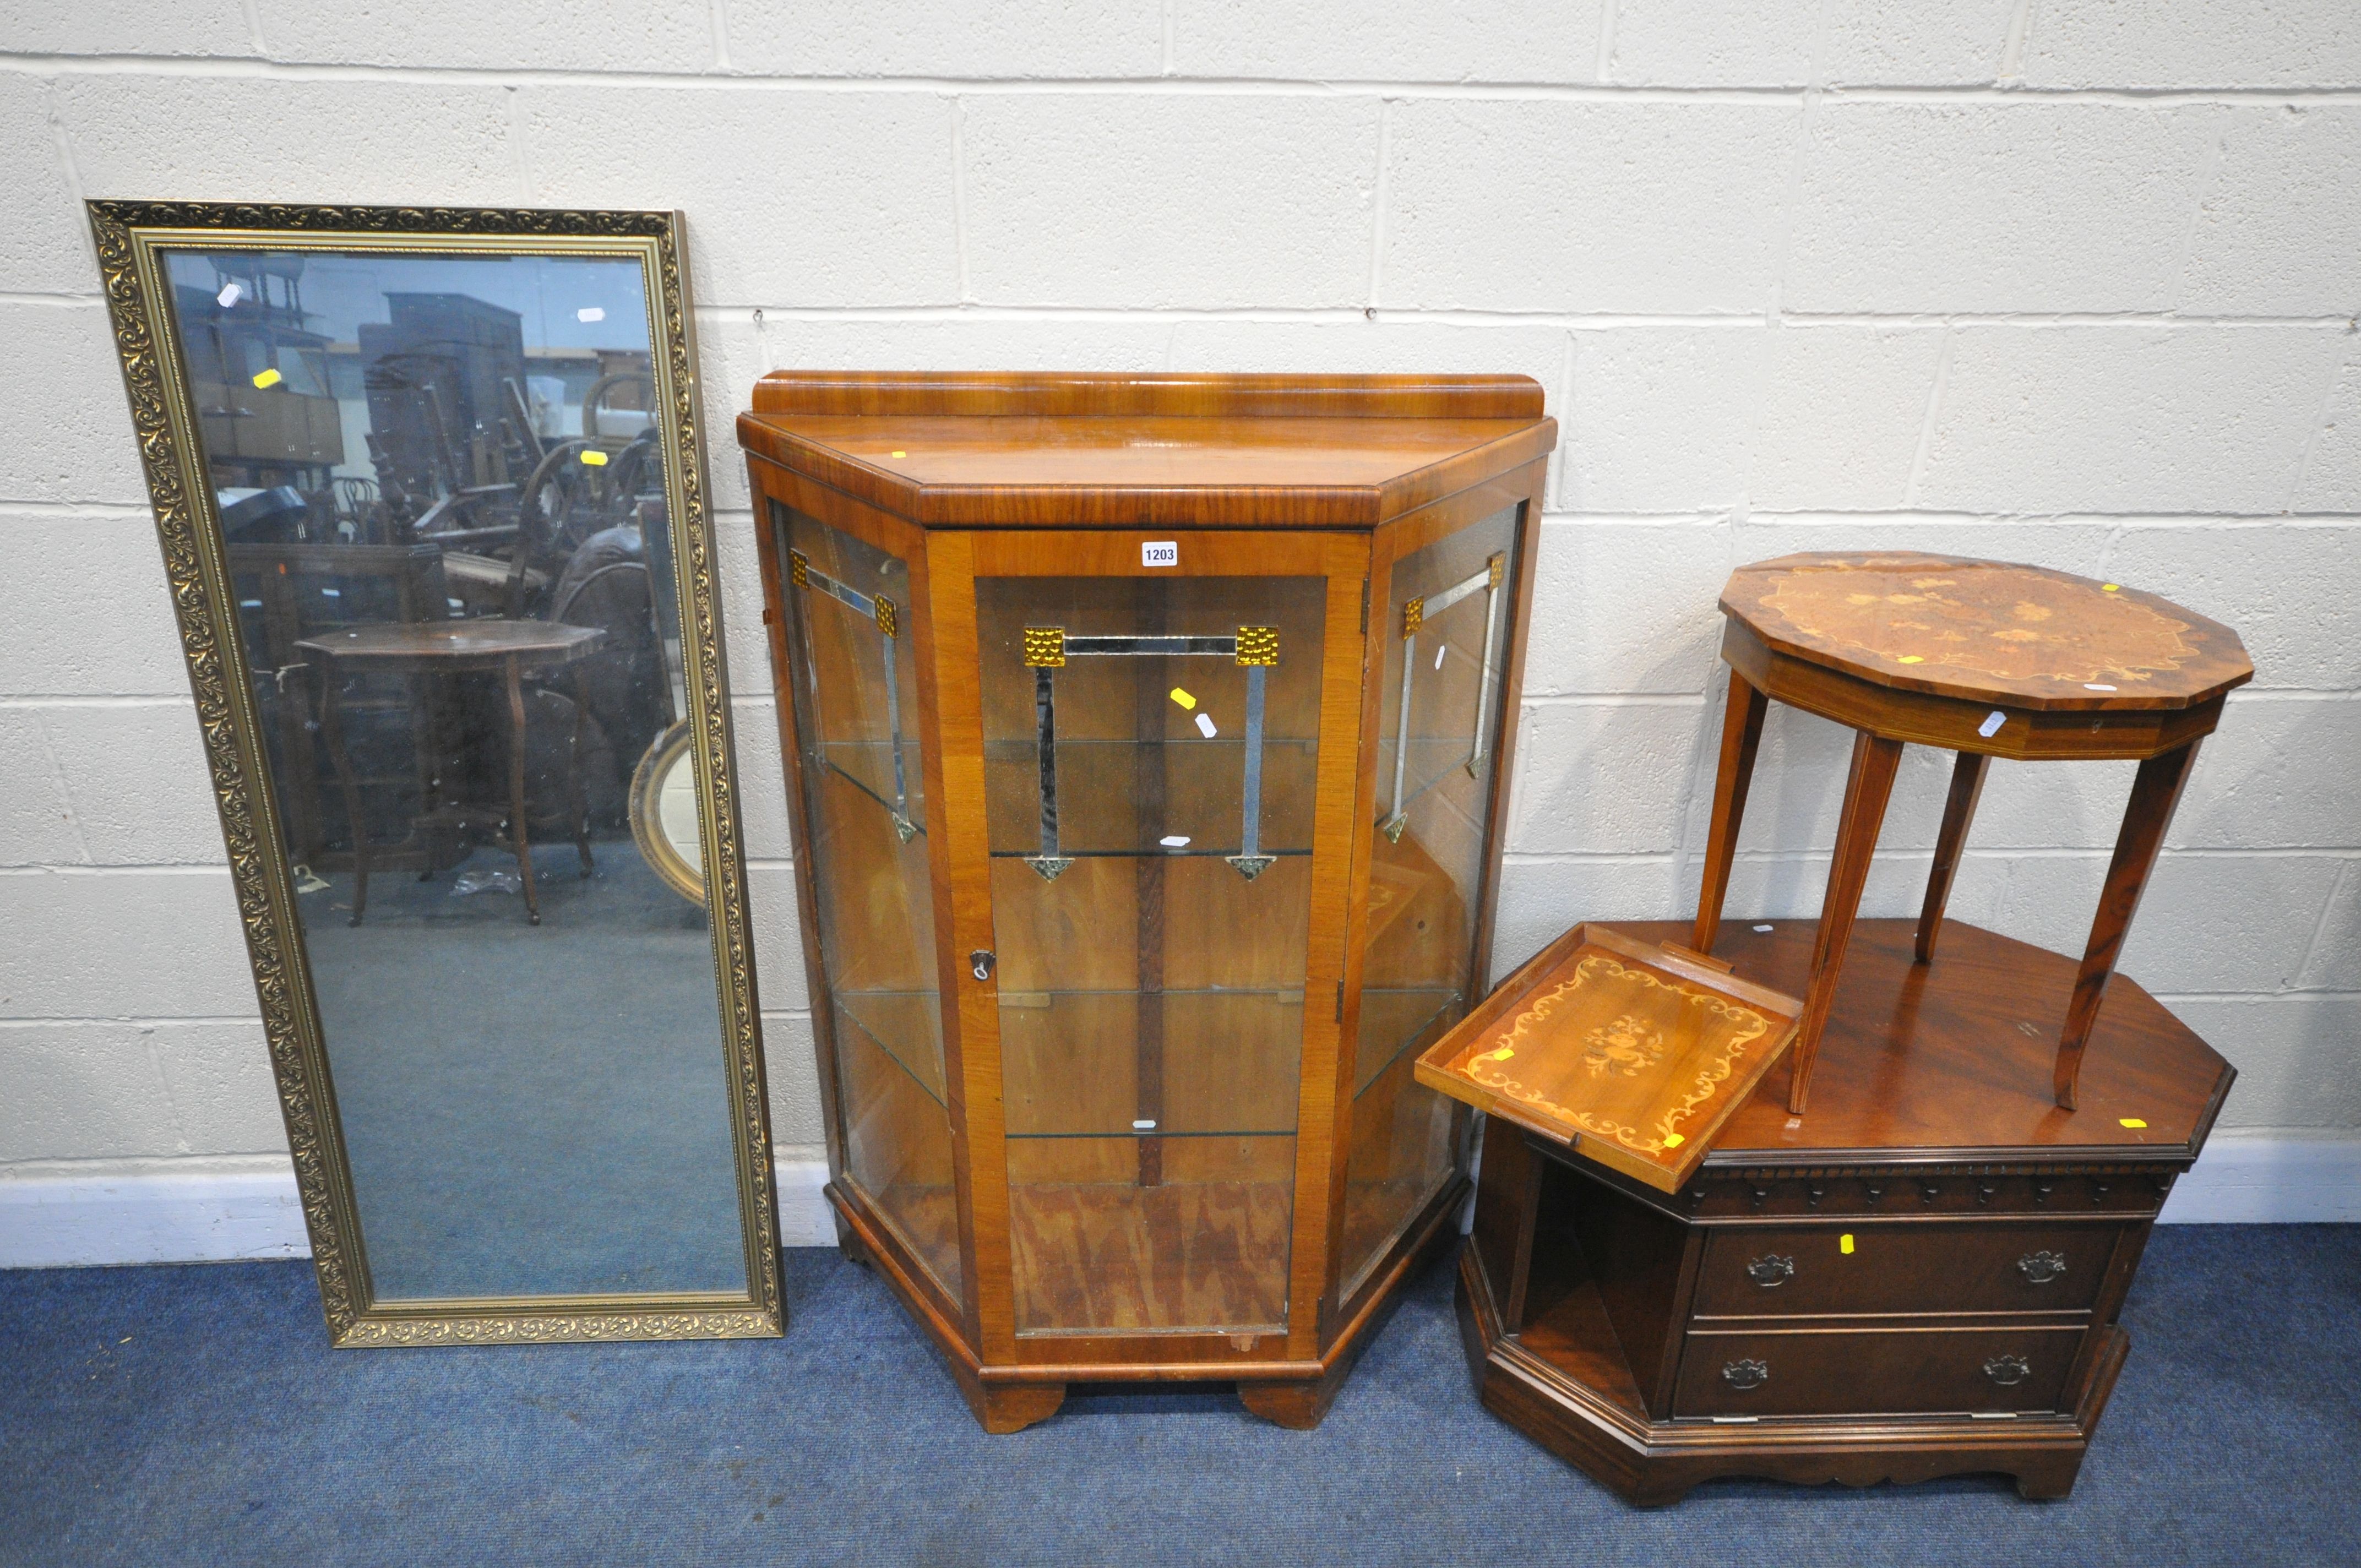 AN ART DECO SINGLE DOOR DISPLAY CABINET, with a raised back, two glass shelves, mirrored